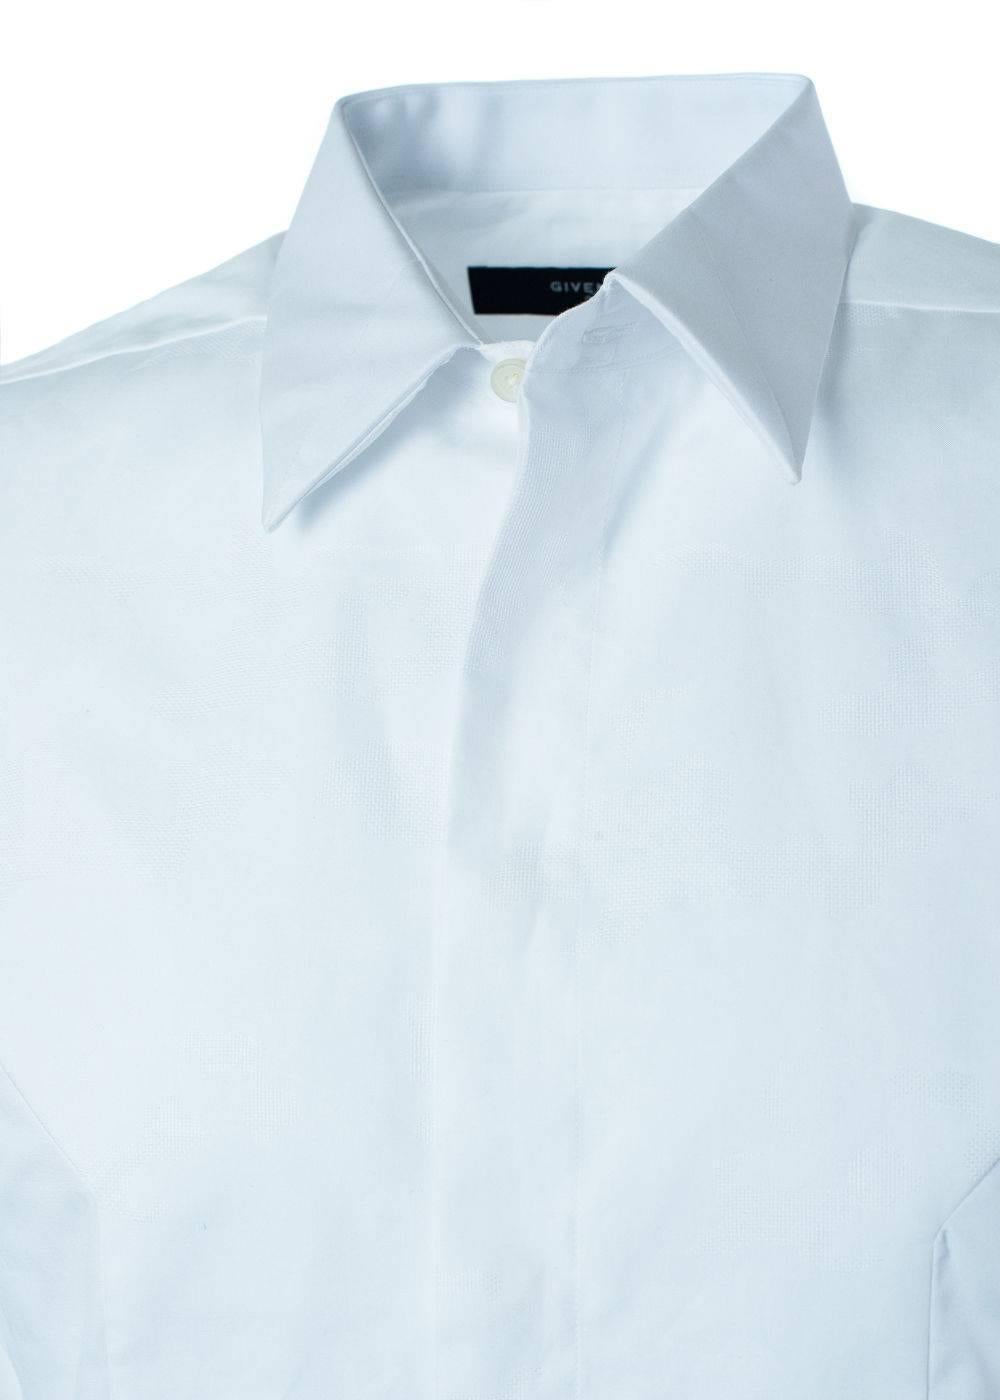 Brand New Givenchy Men's Button Down 
Original Tags
Retails in Stores & Online for $730
Men's Size E42 (XS) Fits True to Size

Every man needs a classic white button down for those professional settings or dressy outings. This Givenchy button down